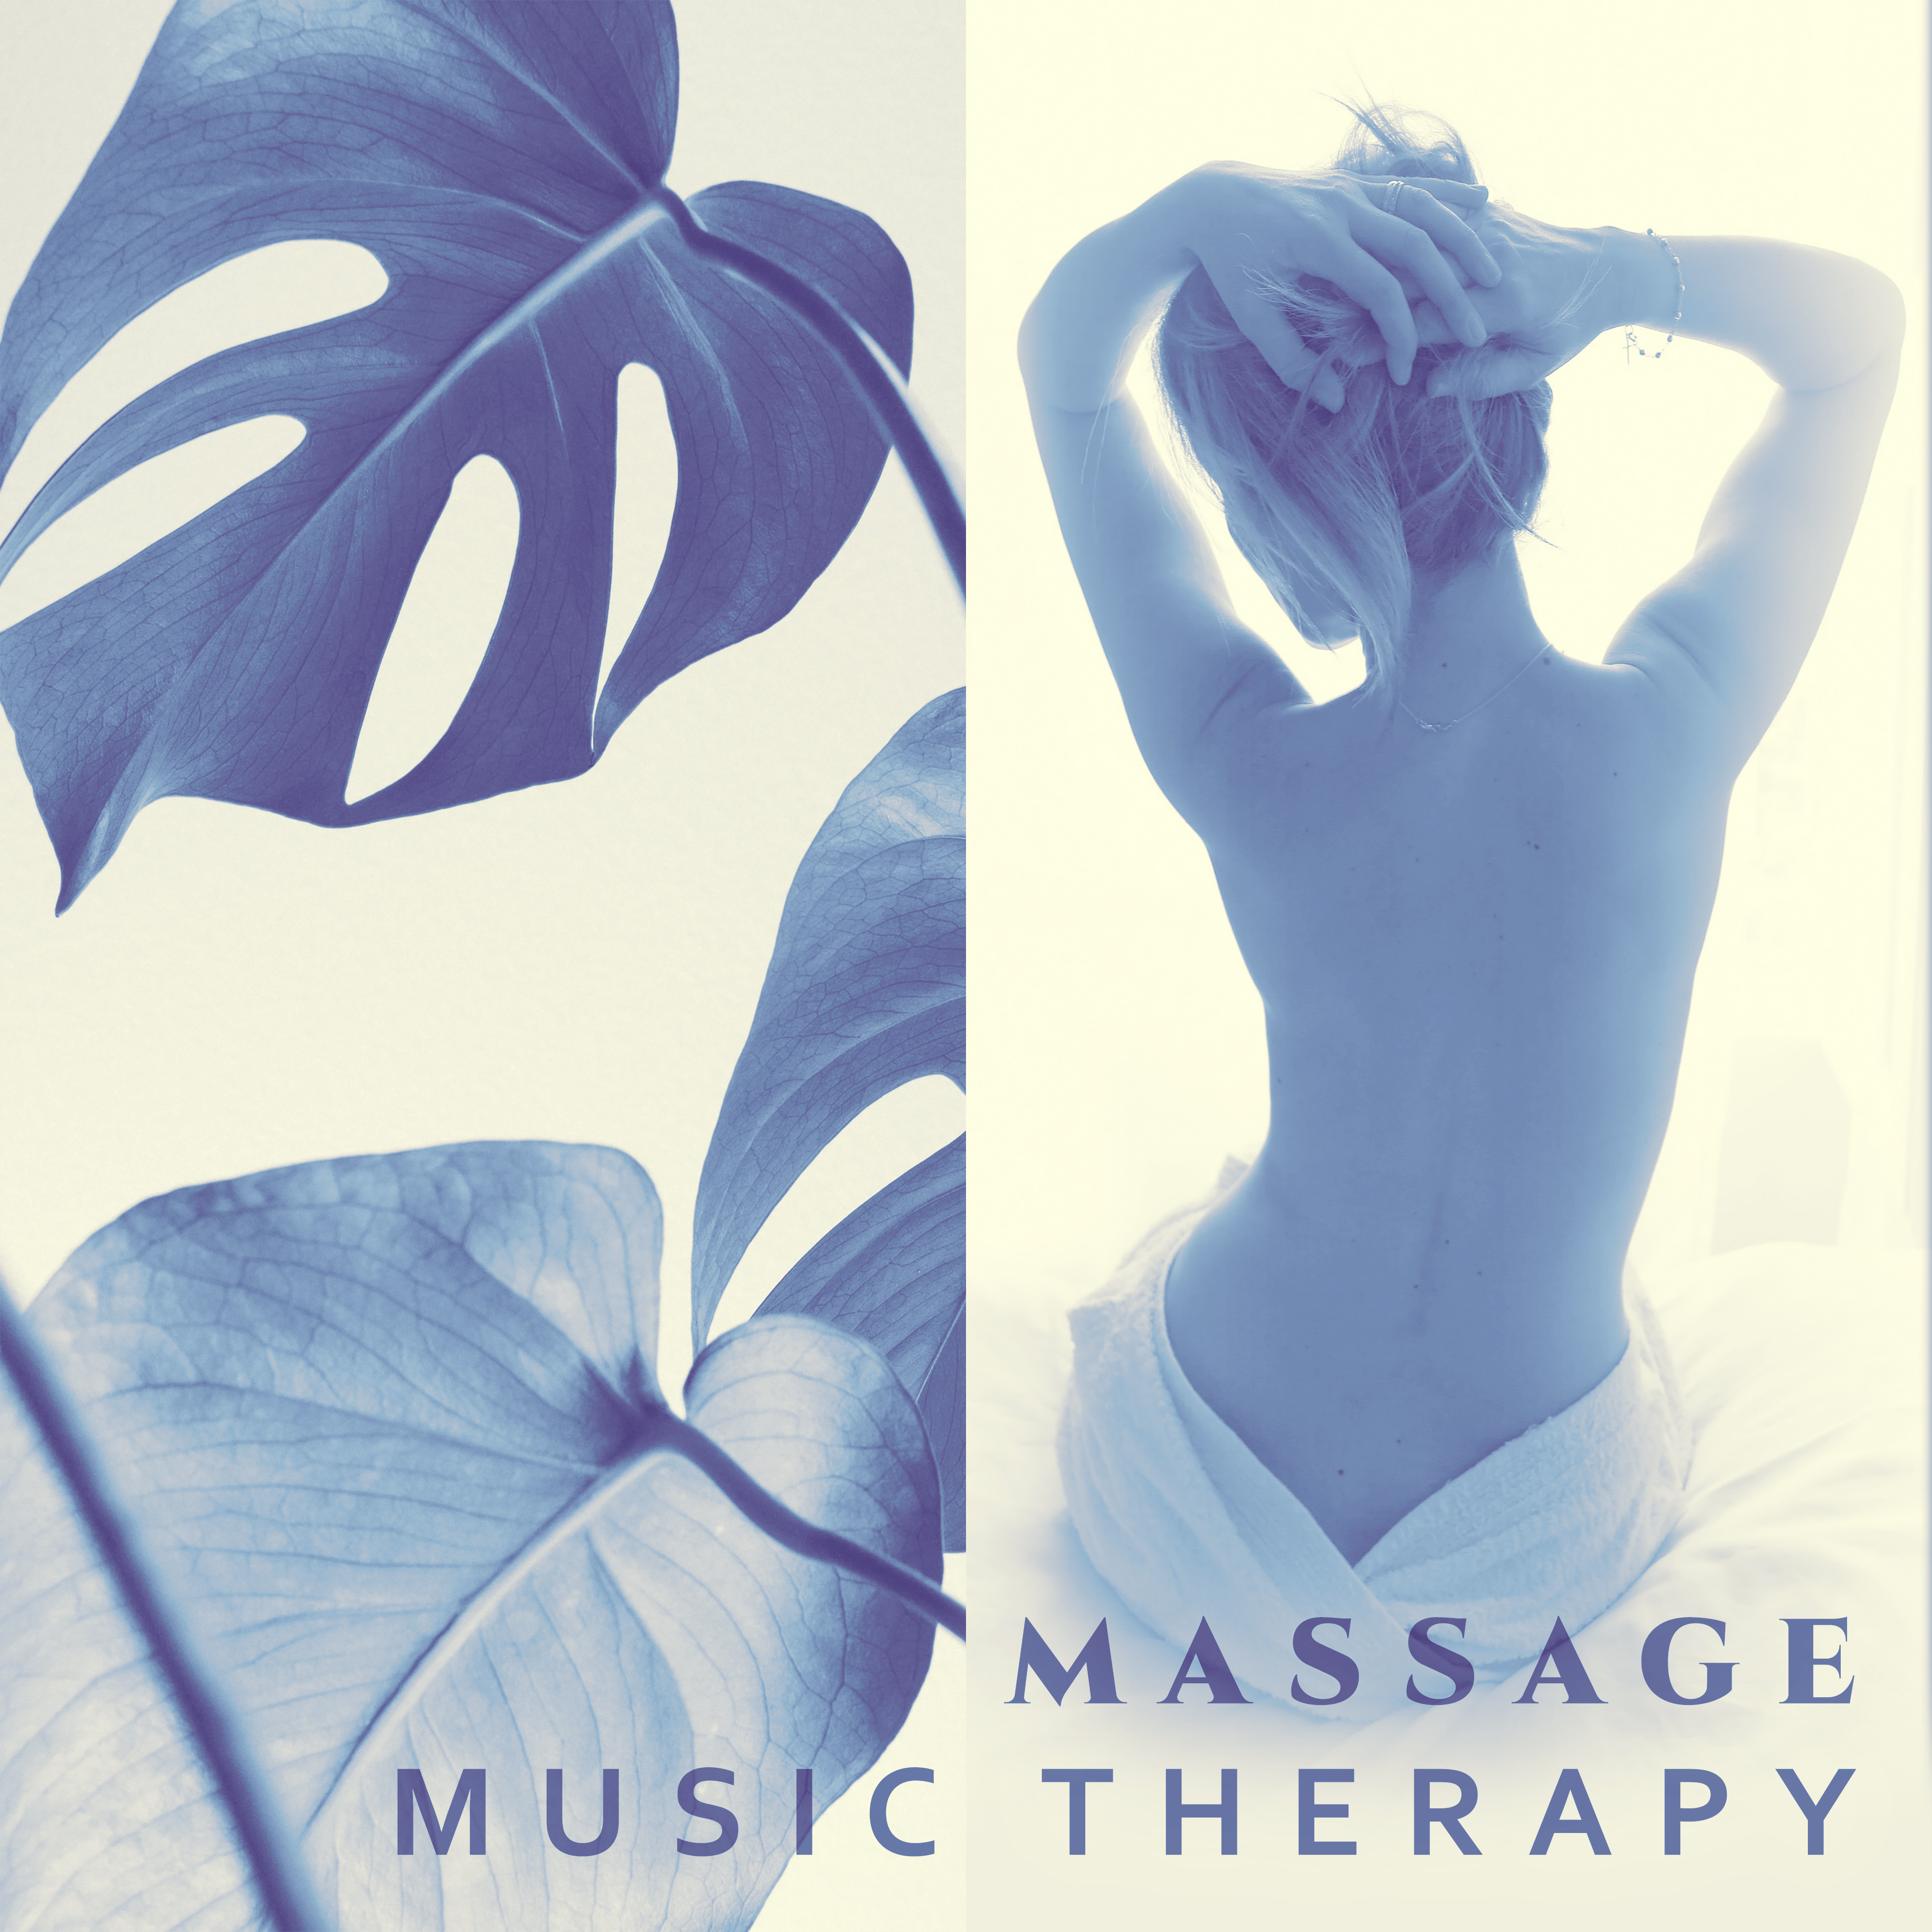 Massage Music Therapy – Relaxing Music, Sounds of Nature for Calm Down Emotions, Relief Stress